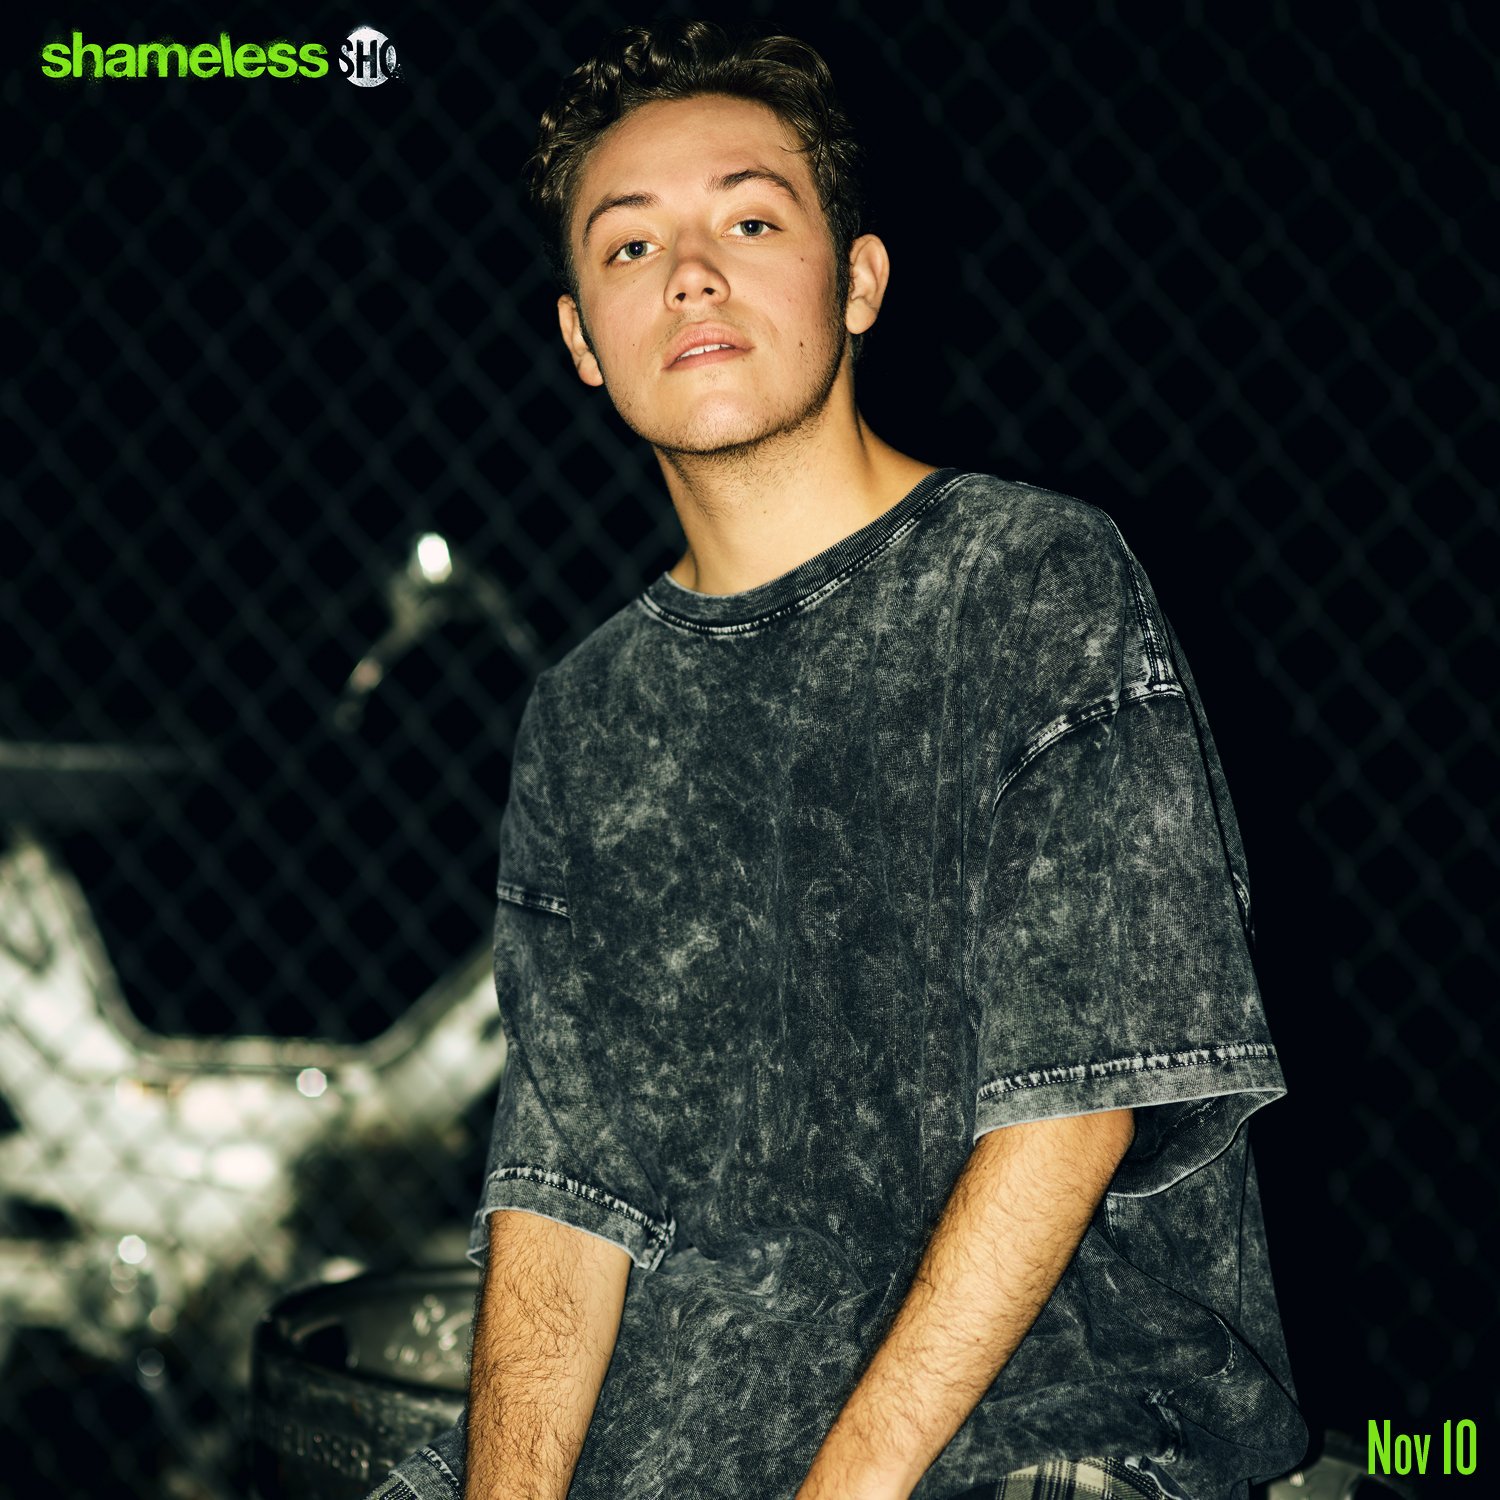 New Carl Gallagher From Hit TV Comedy Series Shameless CD Clock Actor Nice! 